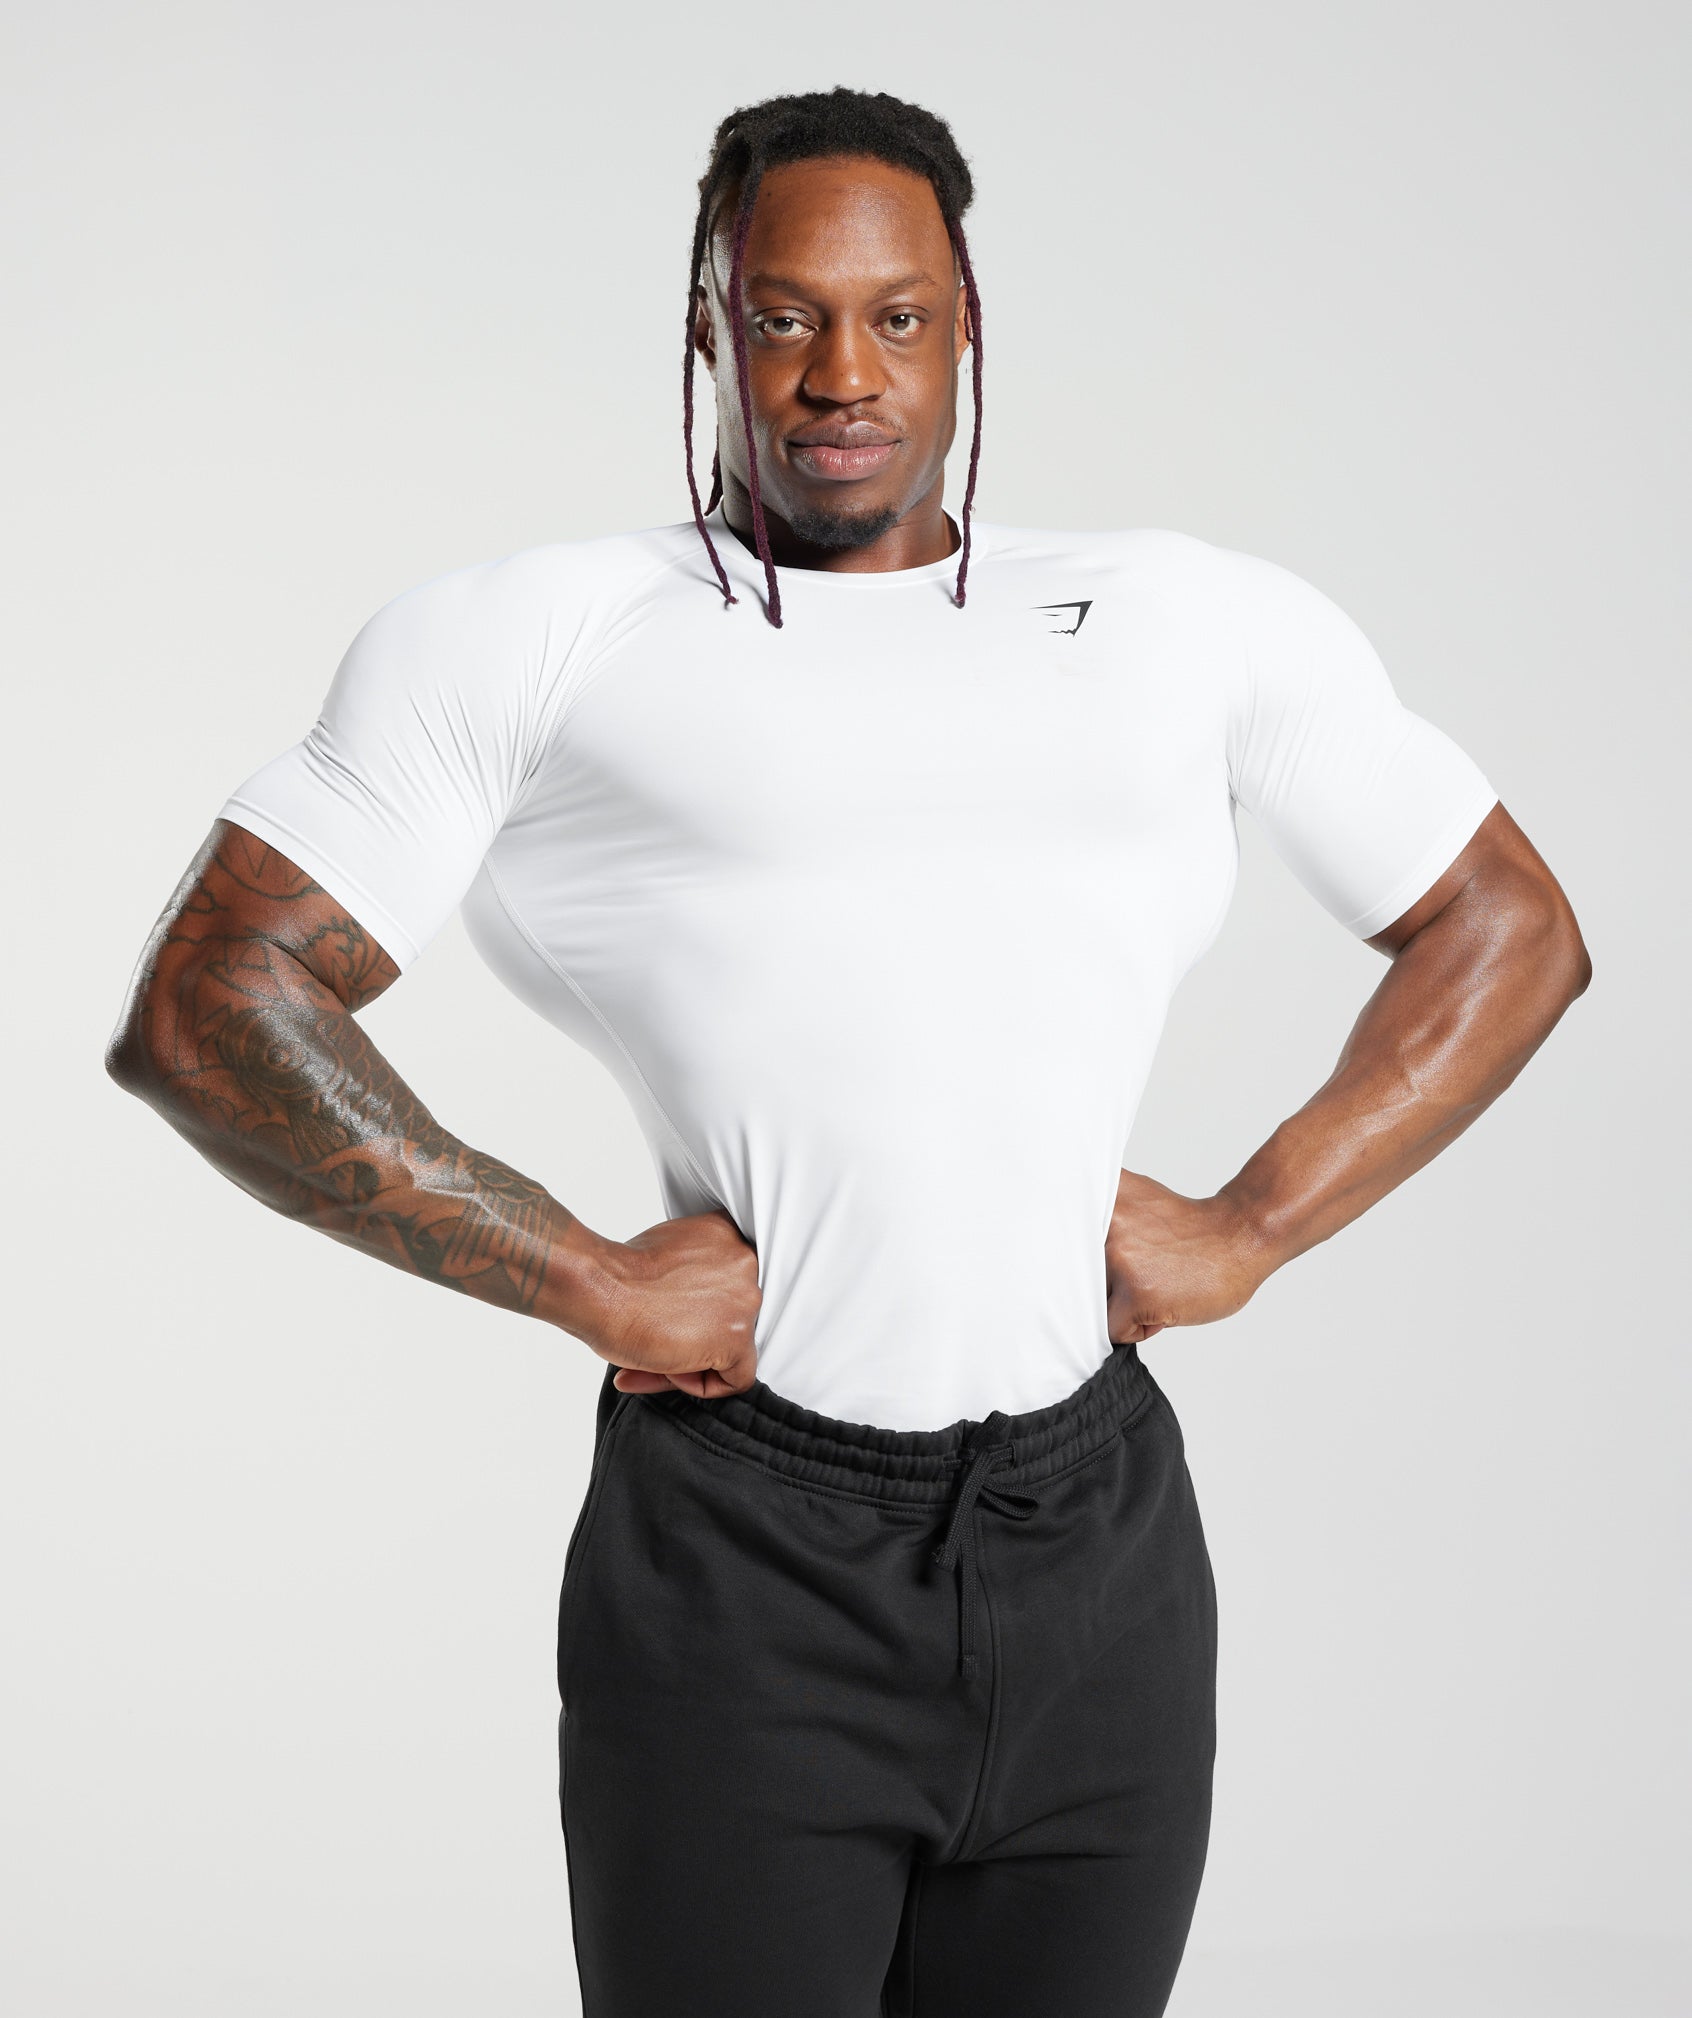 New Compression Shirts for Men 1/2 Single Arm Long Sleeve Athletic Base  Layer Undershirt Gear T Shirt for Workout Basketball